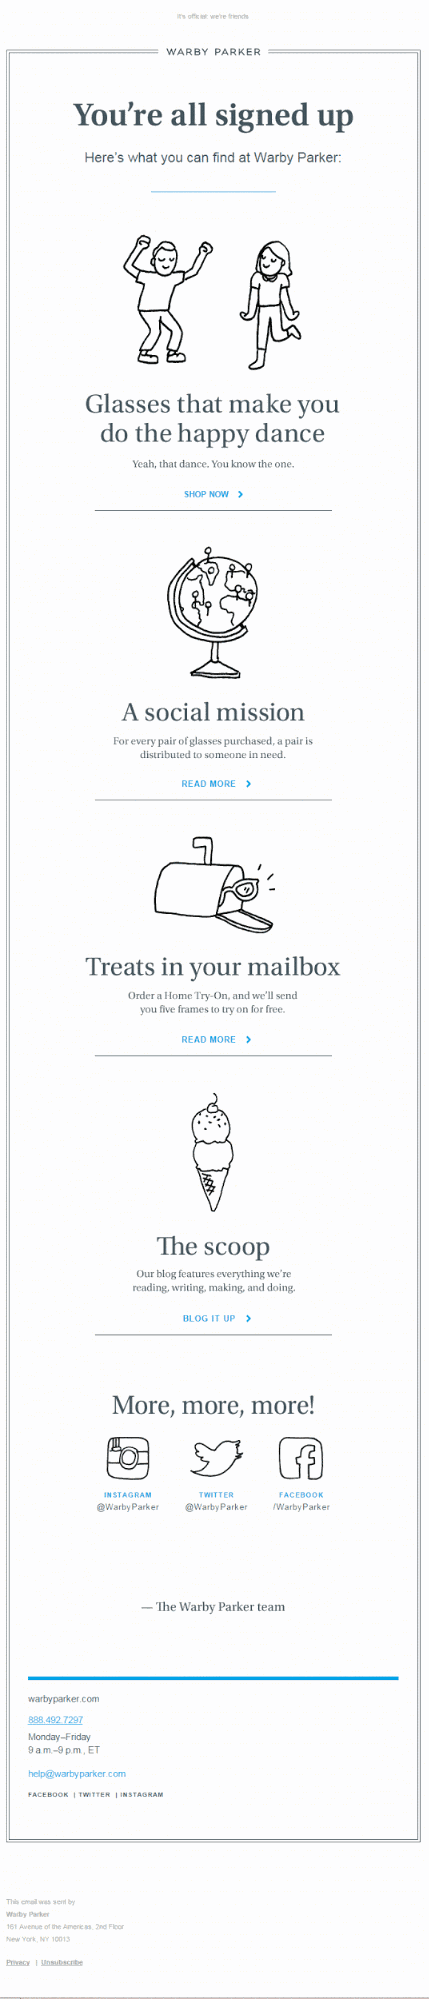 Warby Parker – Email Marketing Metrics – Conversion Rates